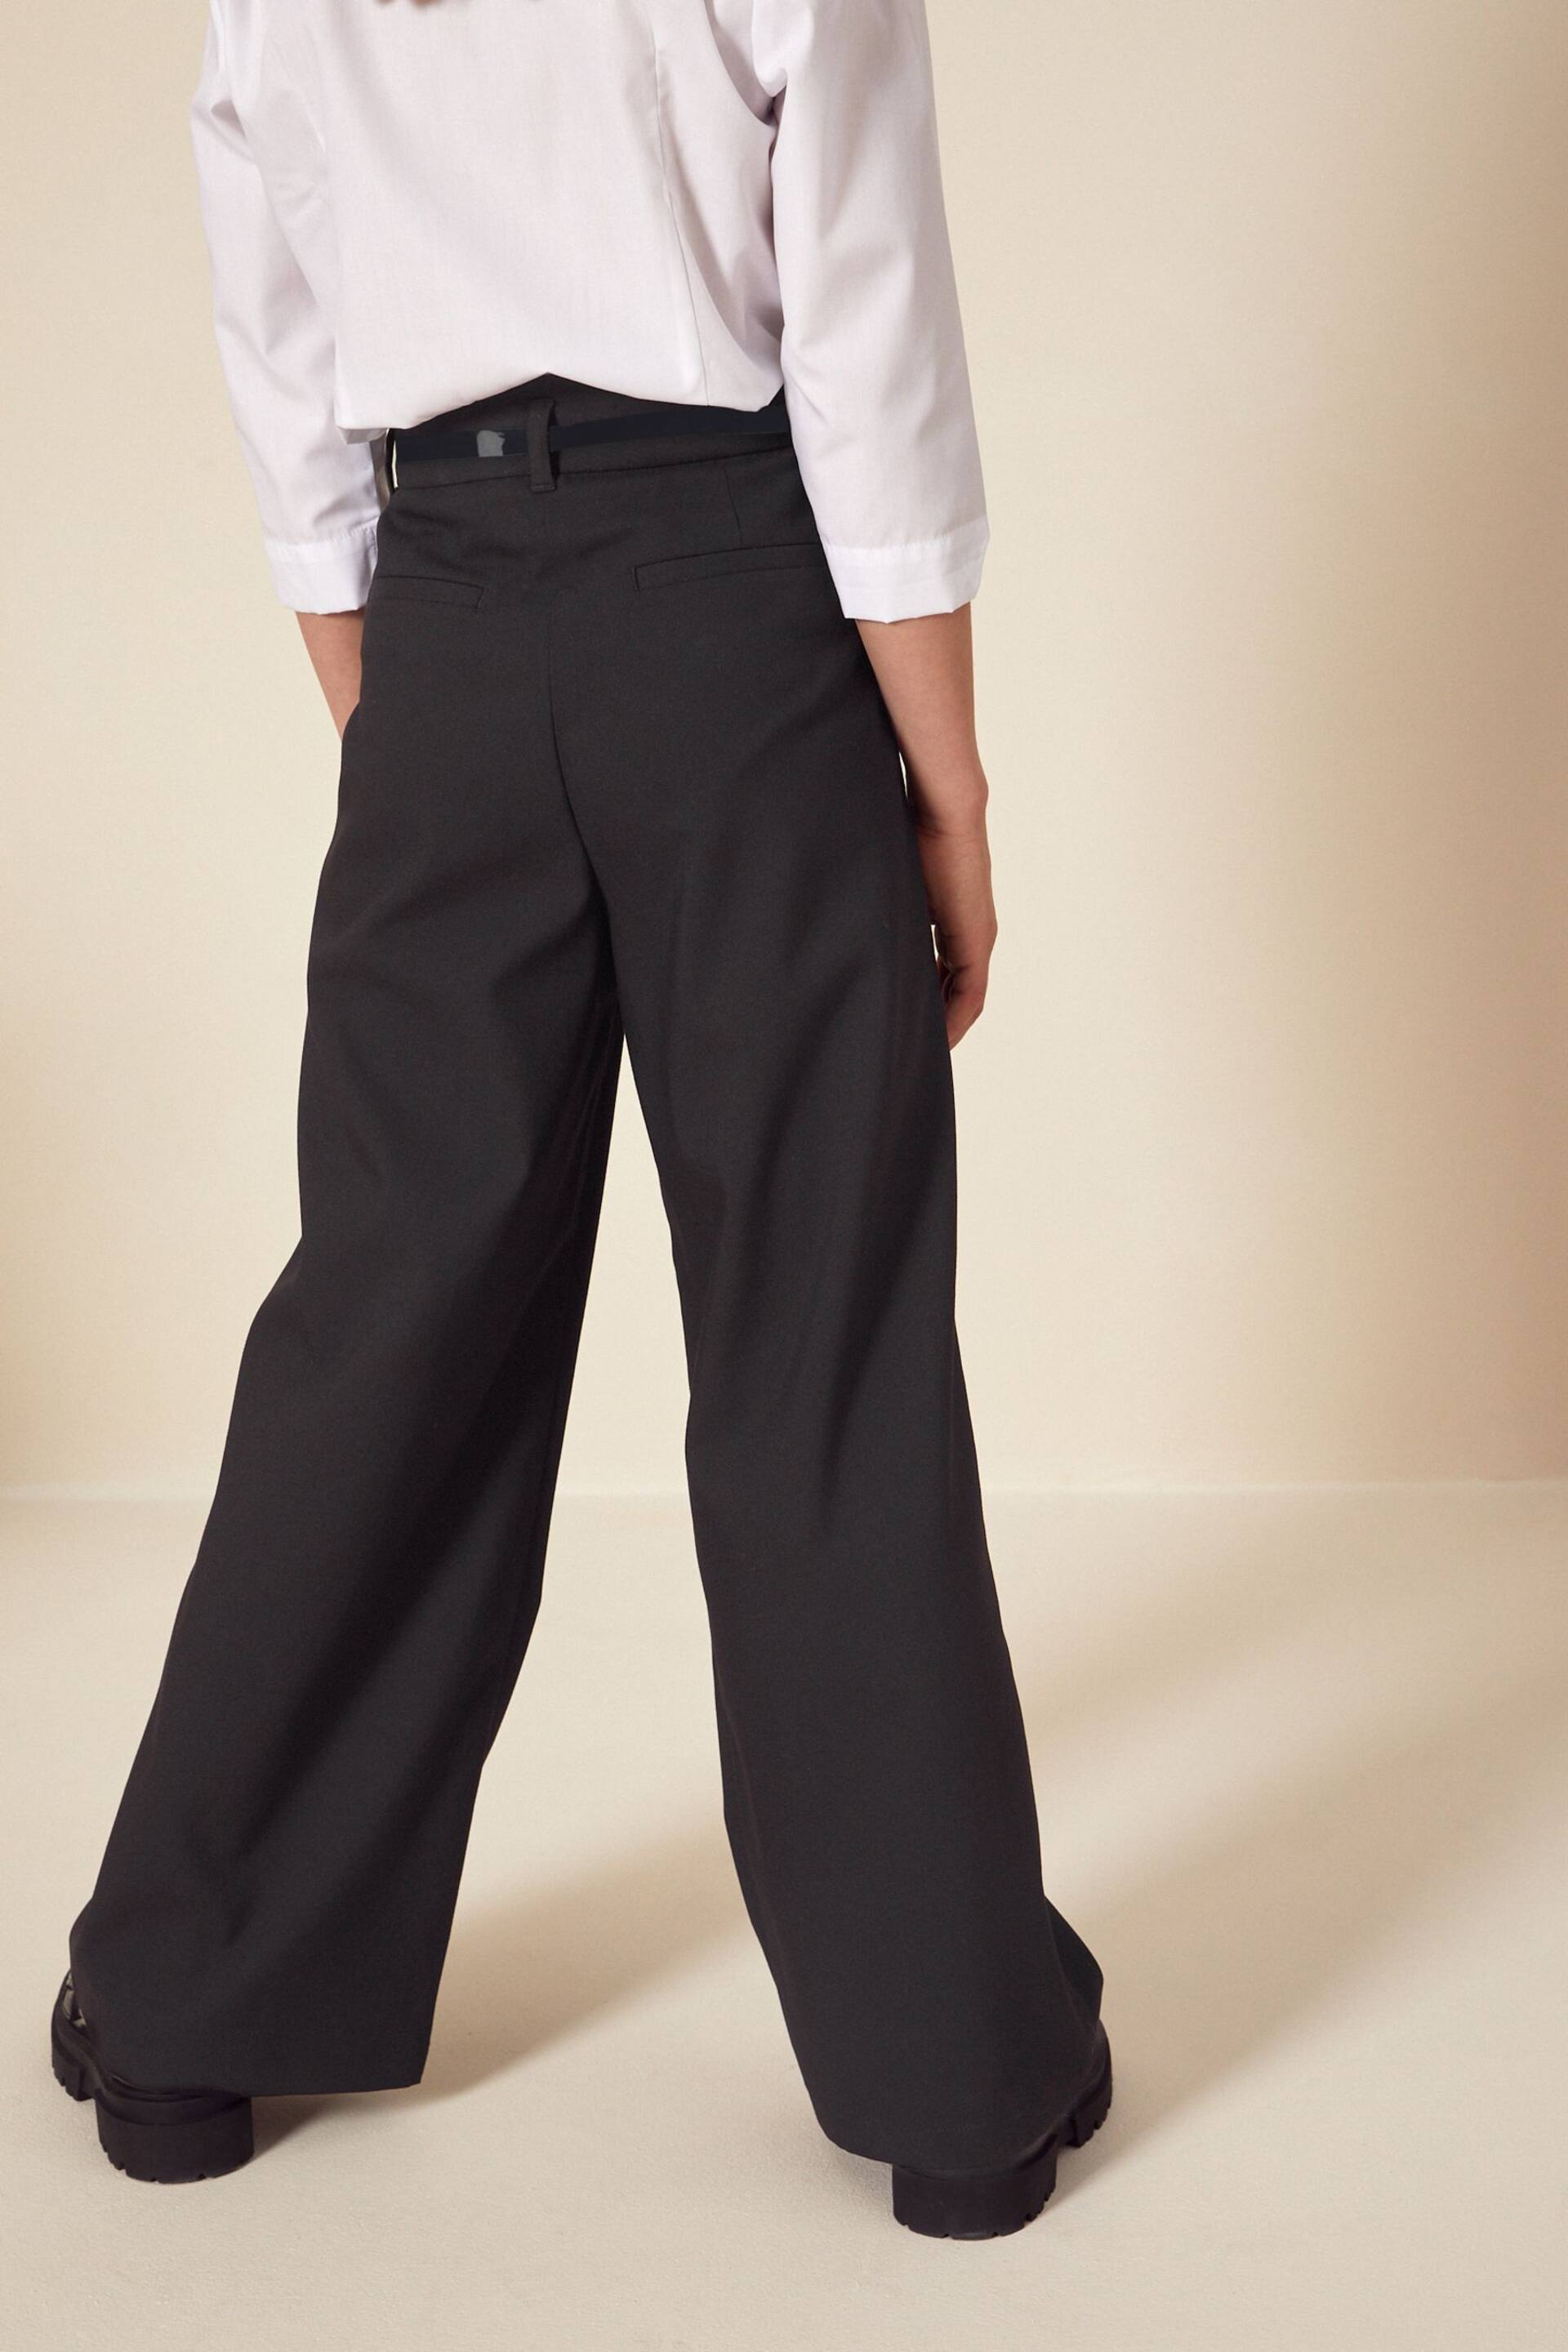 Black Senior Wide Leg Belted School Trousers (9-18yrs) - Image 2 of 6